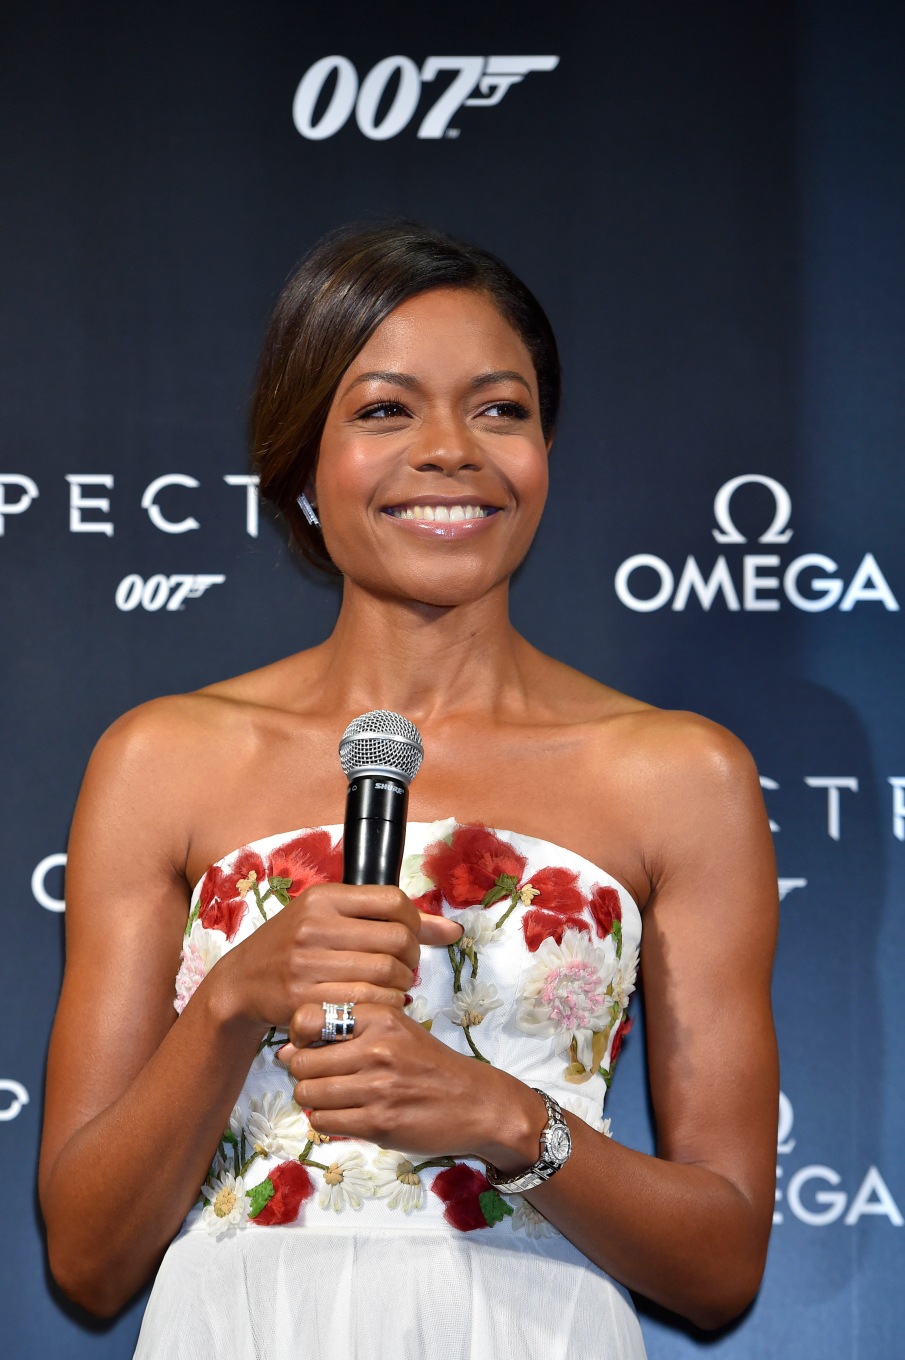 TOKYO, JAPAN - NOVEMBER 30: Naomie Harris attends the event celebrating the OMEGA SPECTRE Japan release on November 30, 2015 in Tokyo, Japan. (Photo by Koki Nagahama/Getty Images for OMEGA) *** Local Caption *** Naomie Harris